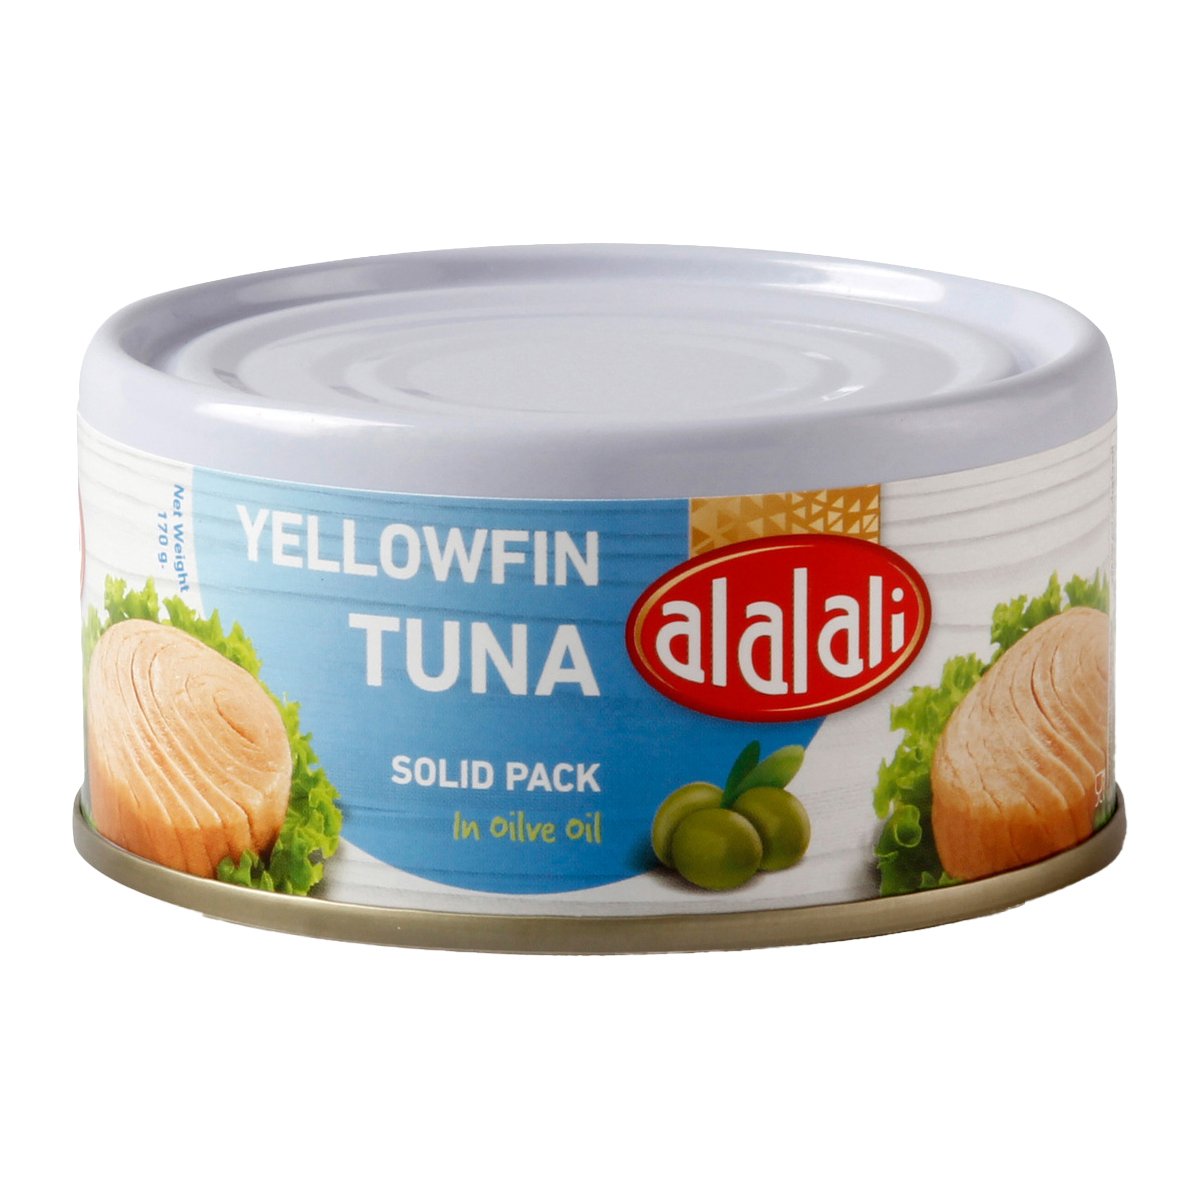 Buy Al Alali Yellowfin Tuna Solid Pack In Olive Oil 170 g Online at Best Price | Canned Tuna | Lulu Kuwait in Kuwait